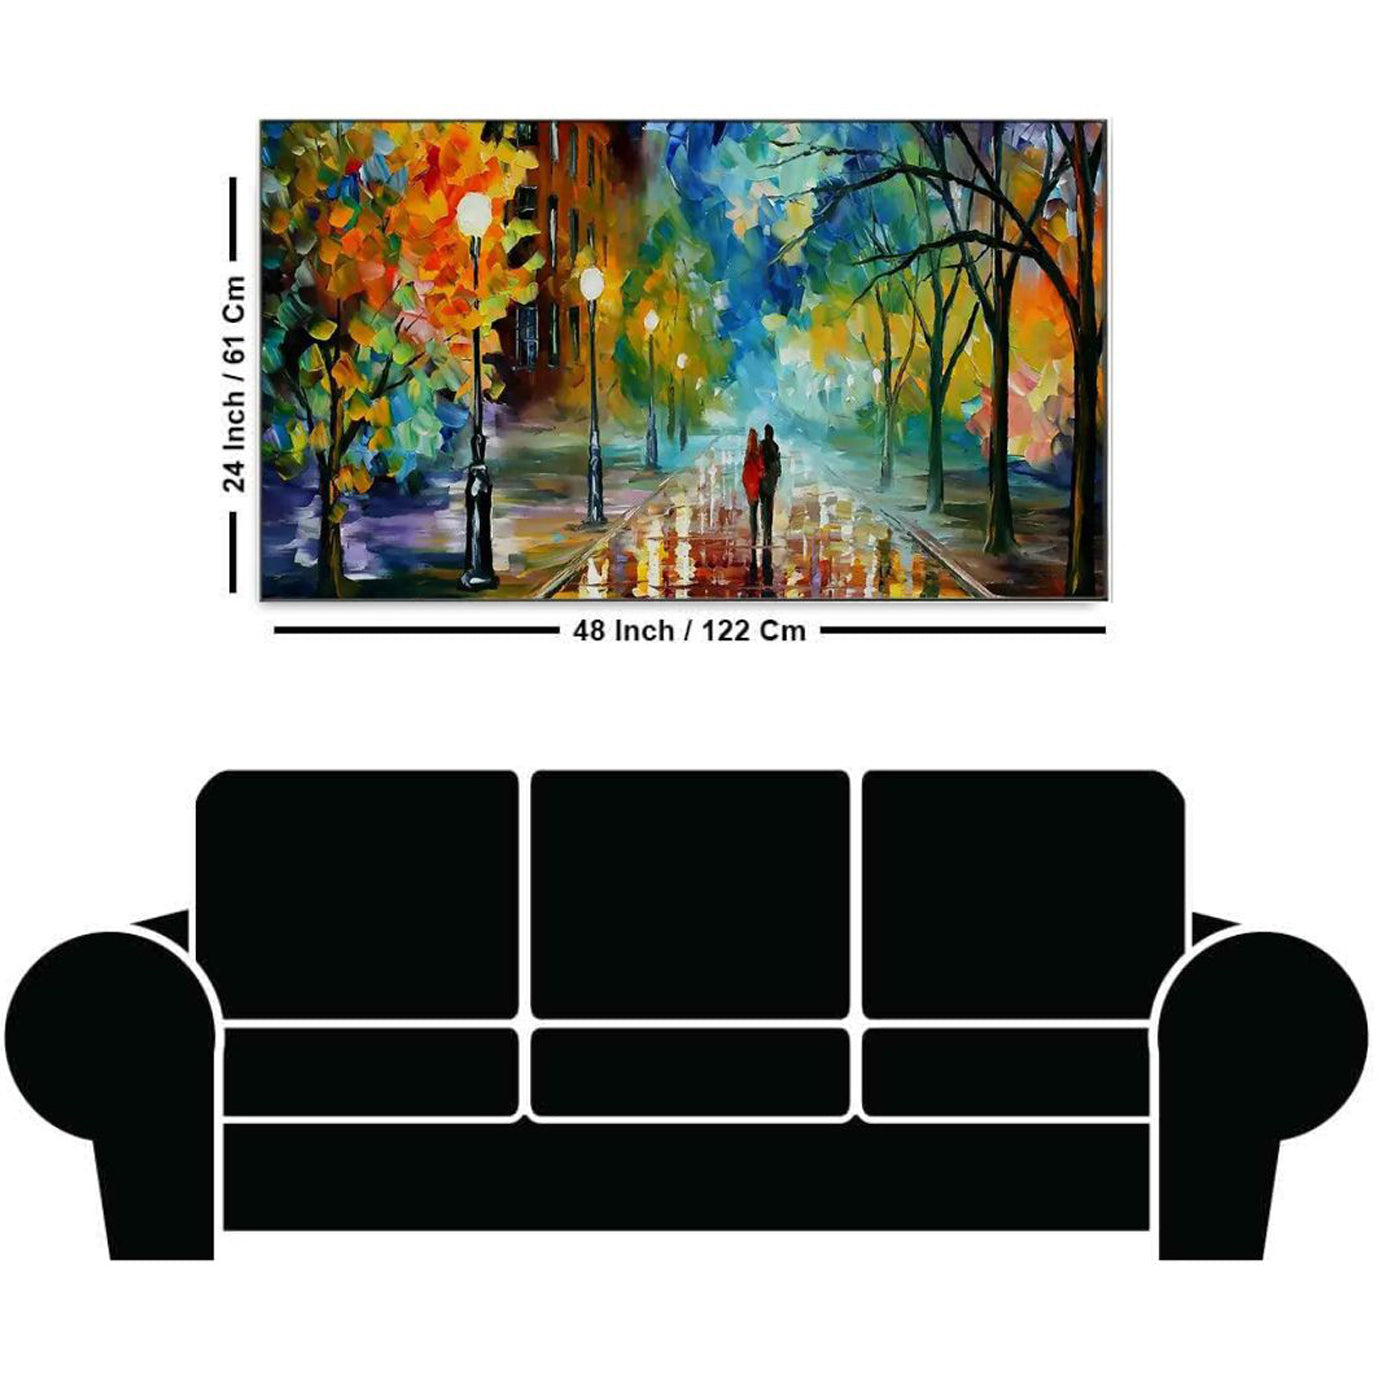 Love couple canvas print is on wooden frame with hooks mounted on each panel